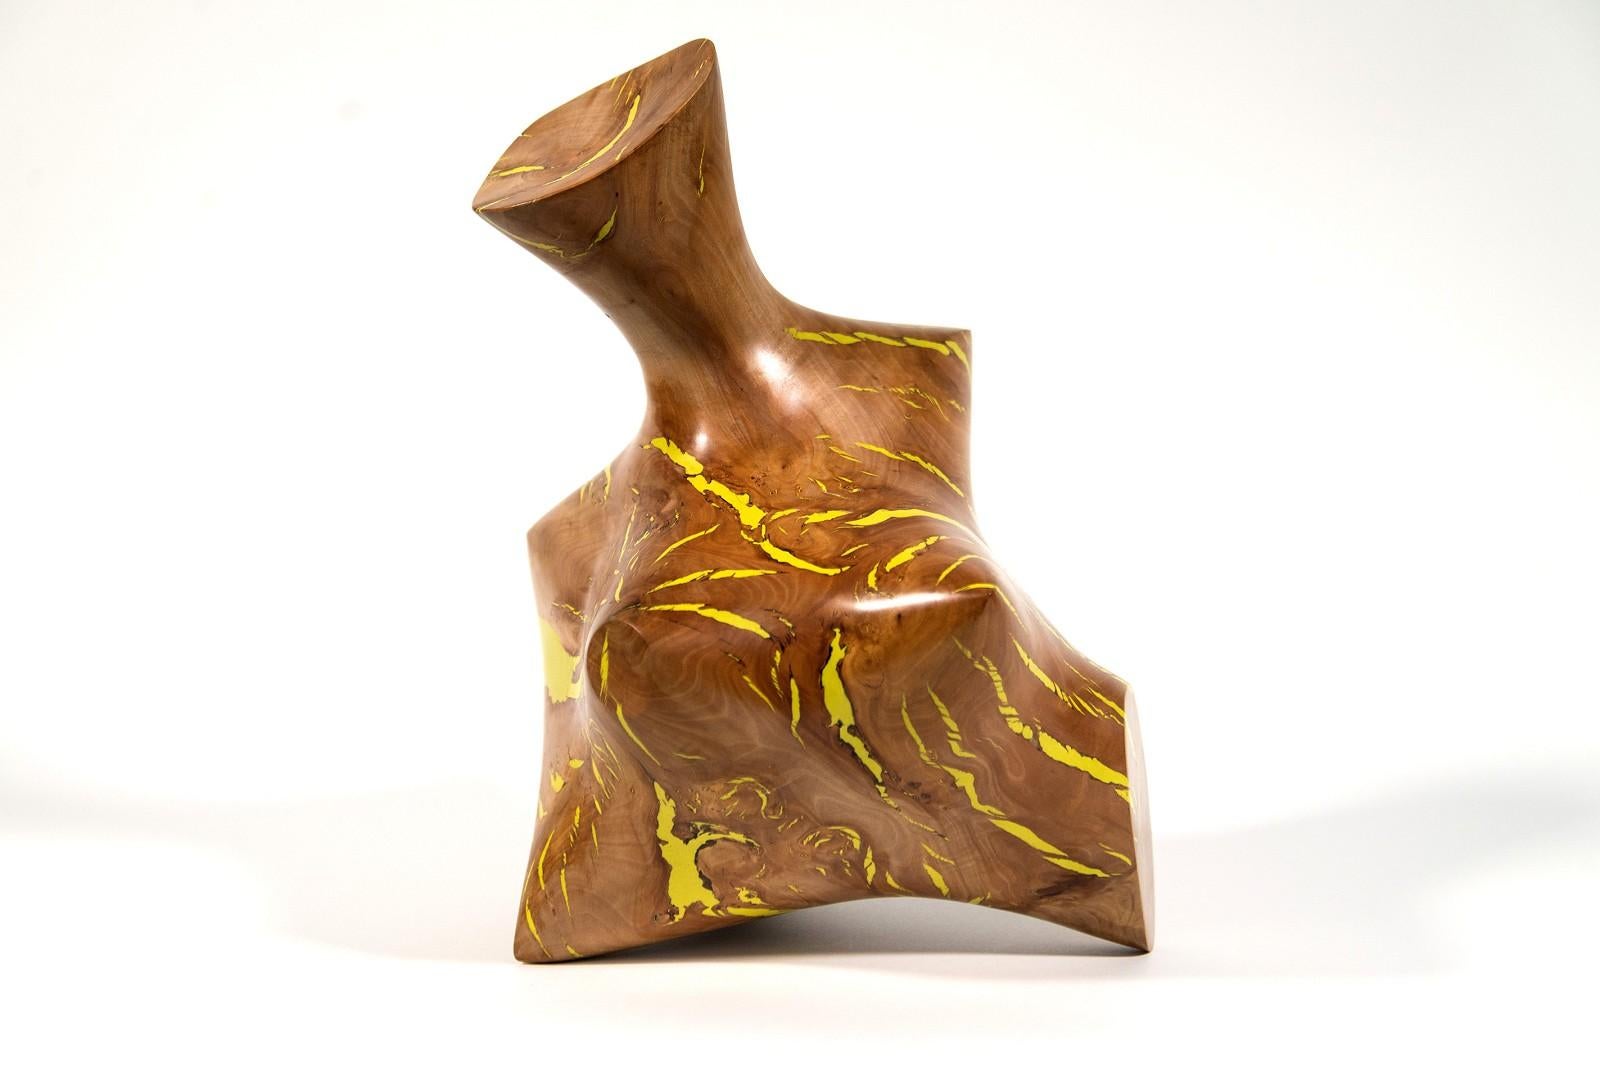 Windfall Series II No 1 - smooth, carved, abstract, Applewood & resin sculpture - Sculpture by Shayne Dark